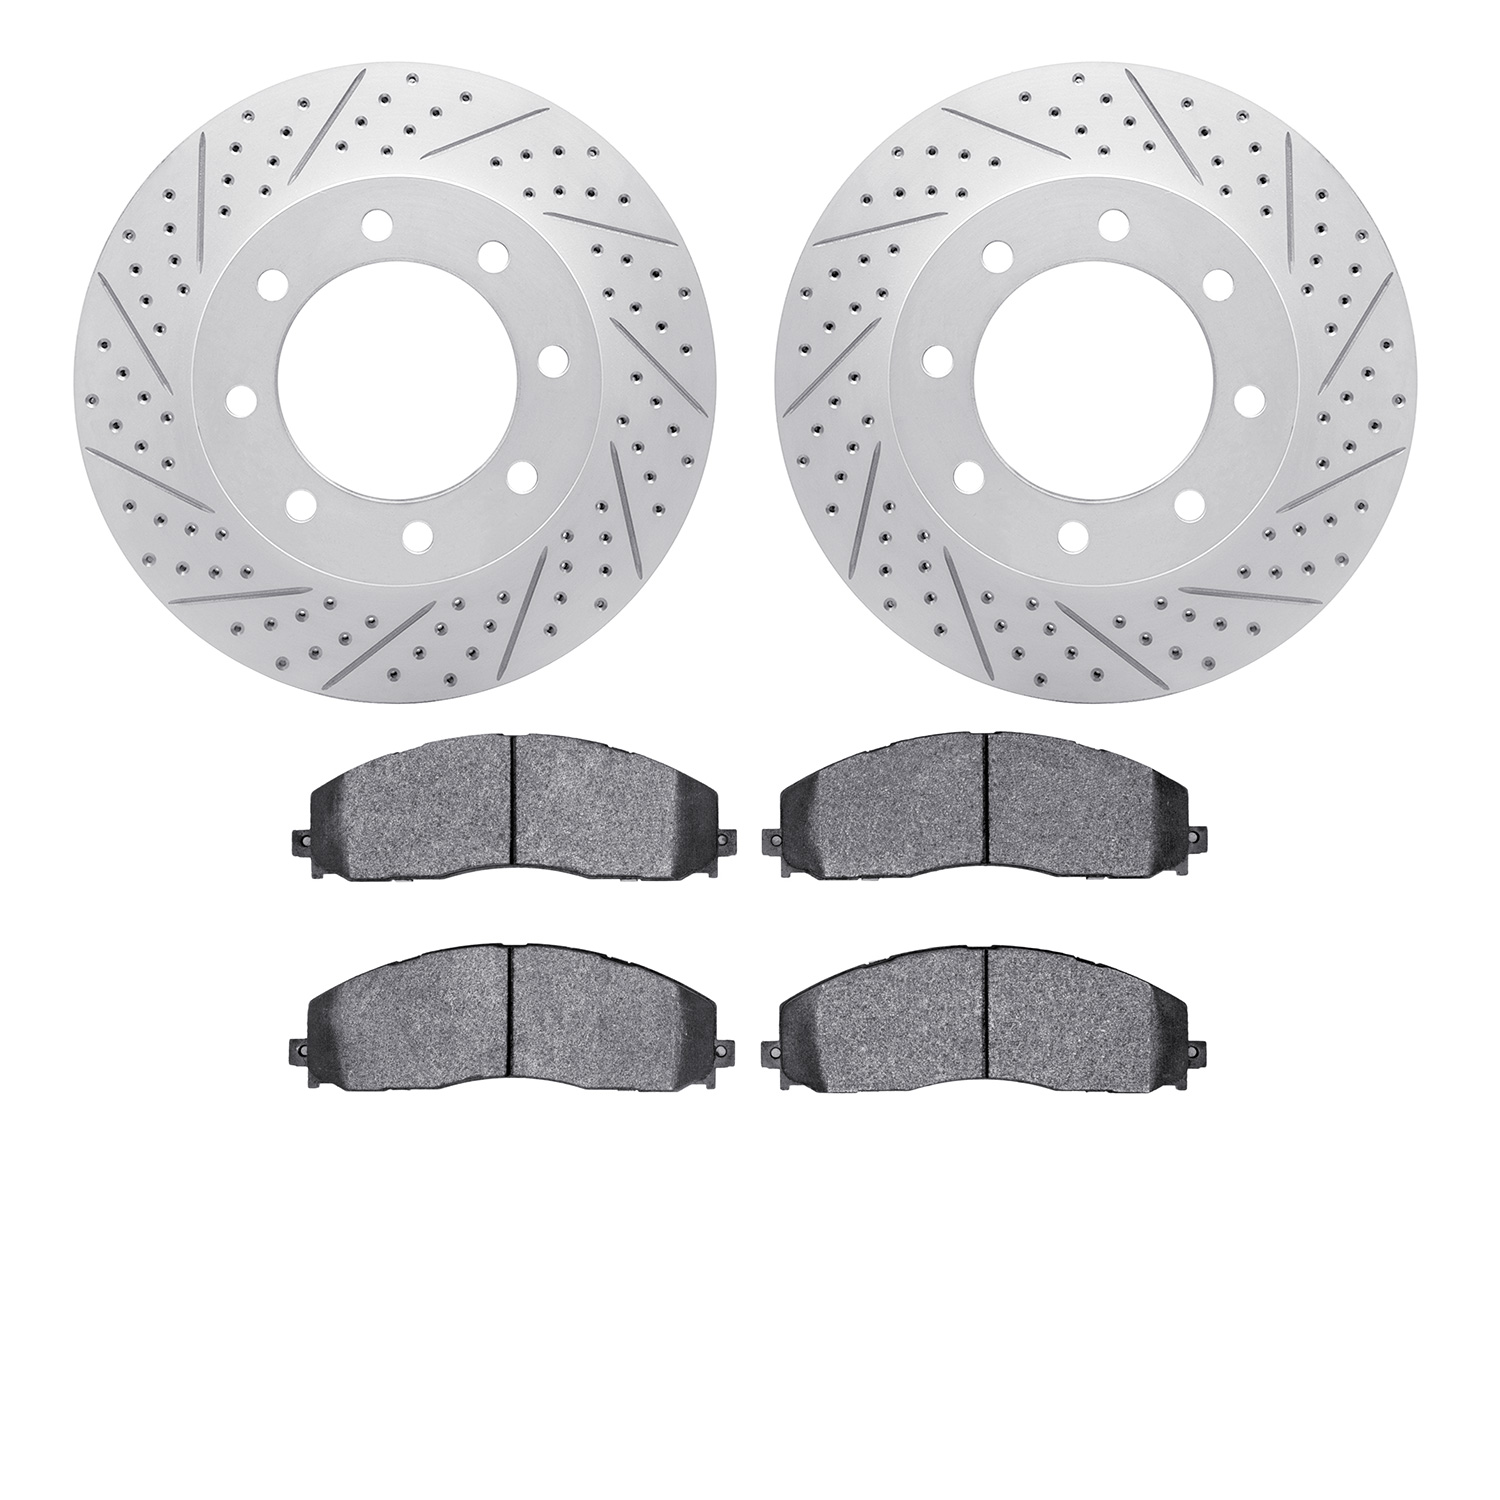 2202-99183 Geoperformance Drilled/Slotted Rotors w/Heavy-Duty Pads Kit, Fits Select Ford/Lincoln/Mercury/Mazda, Position: Front